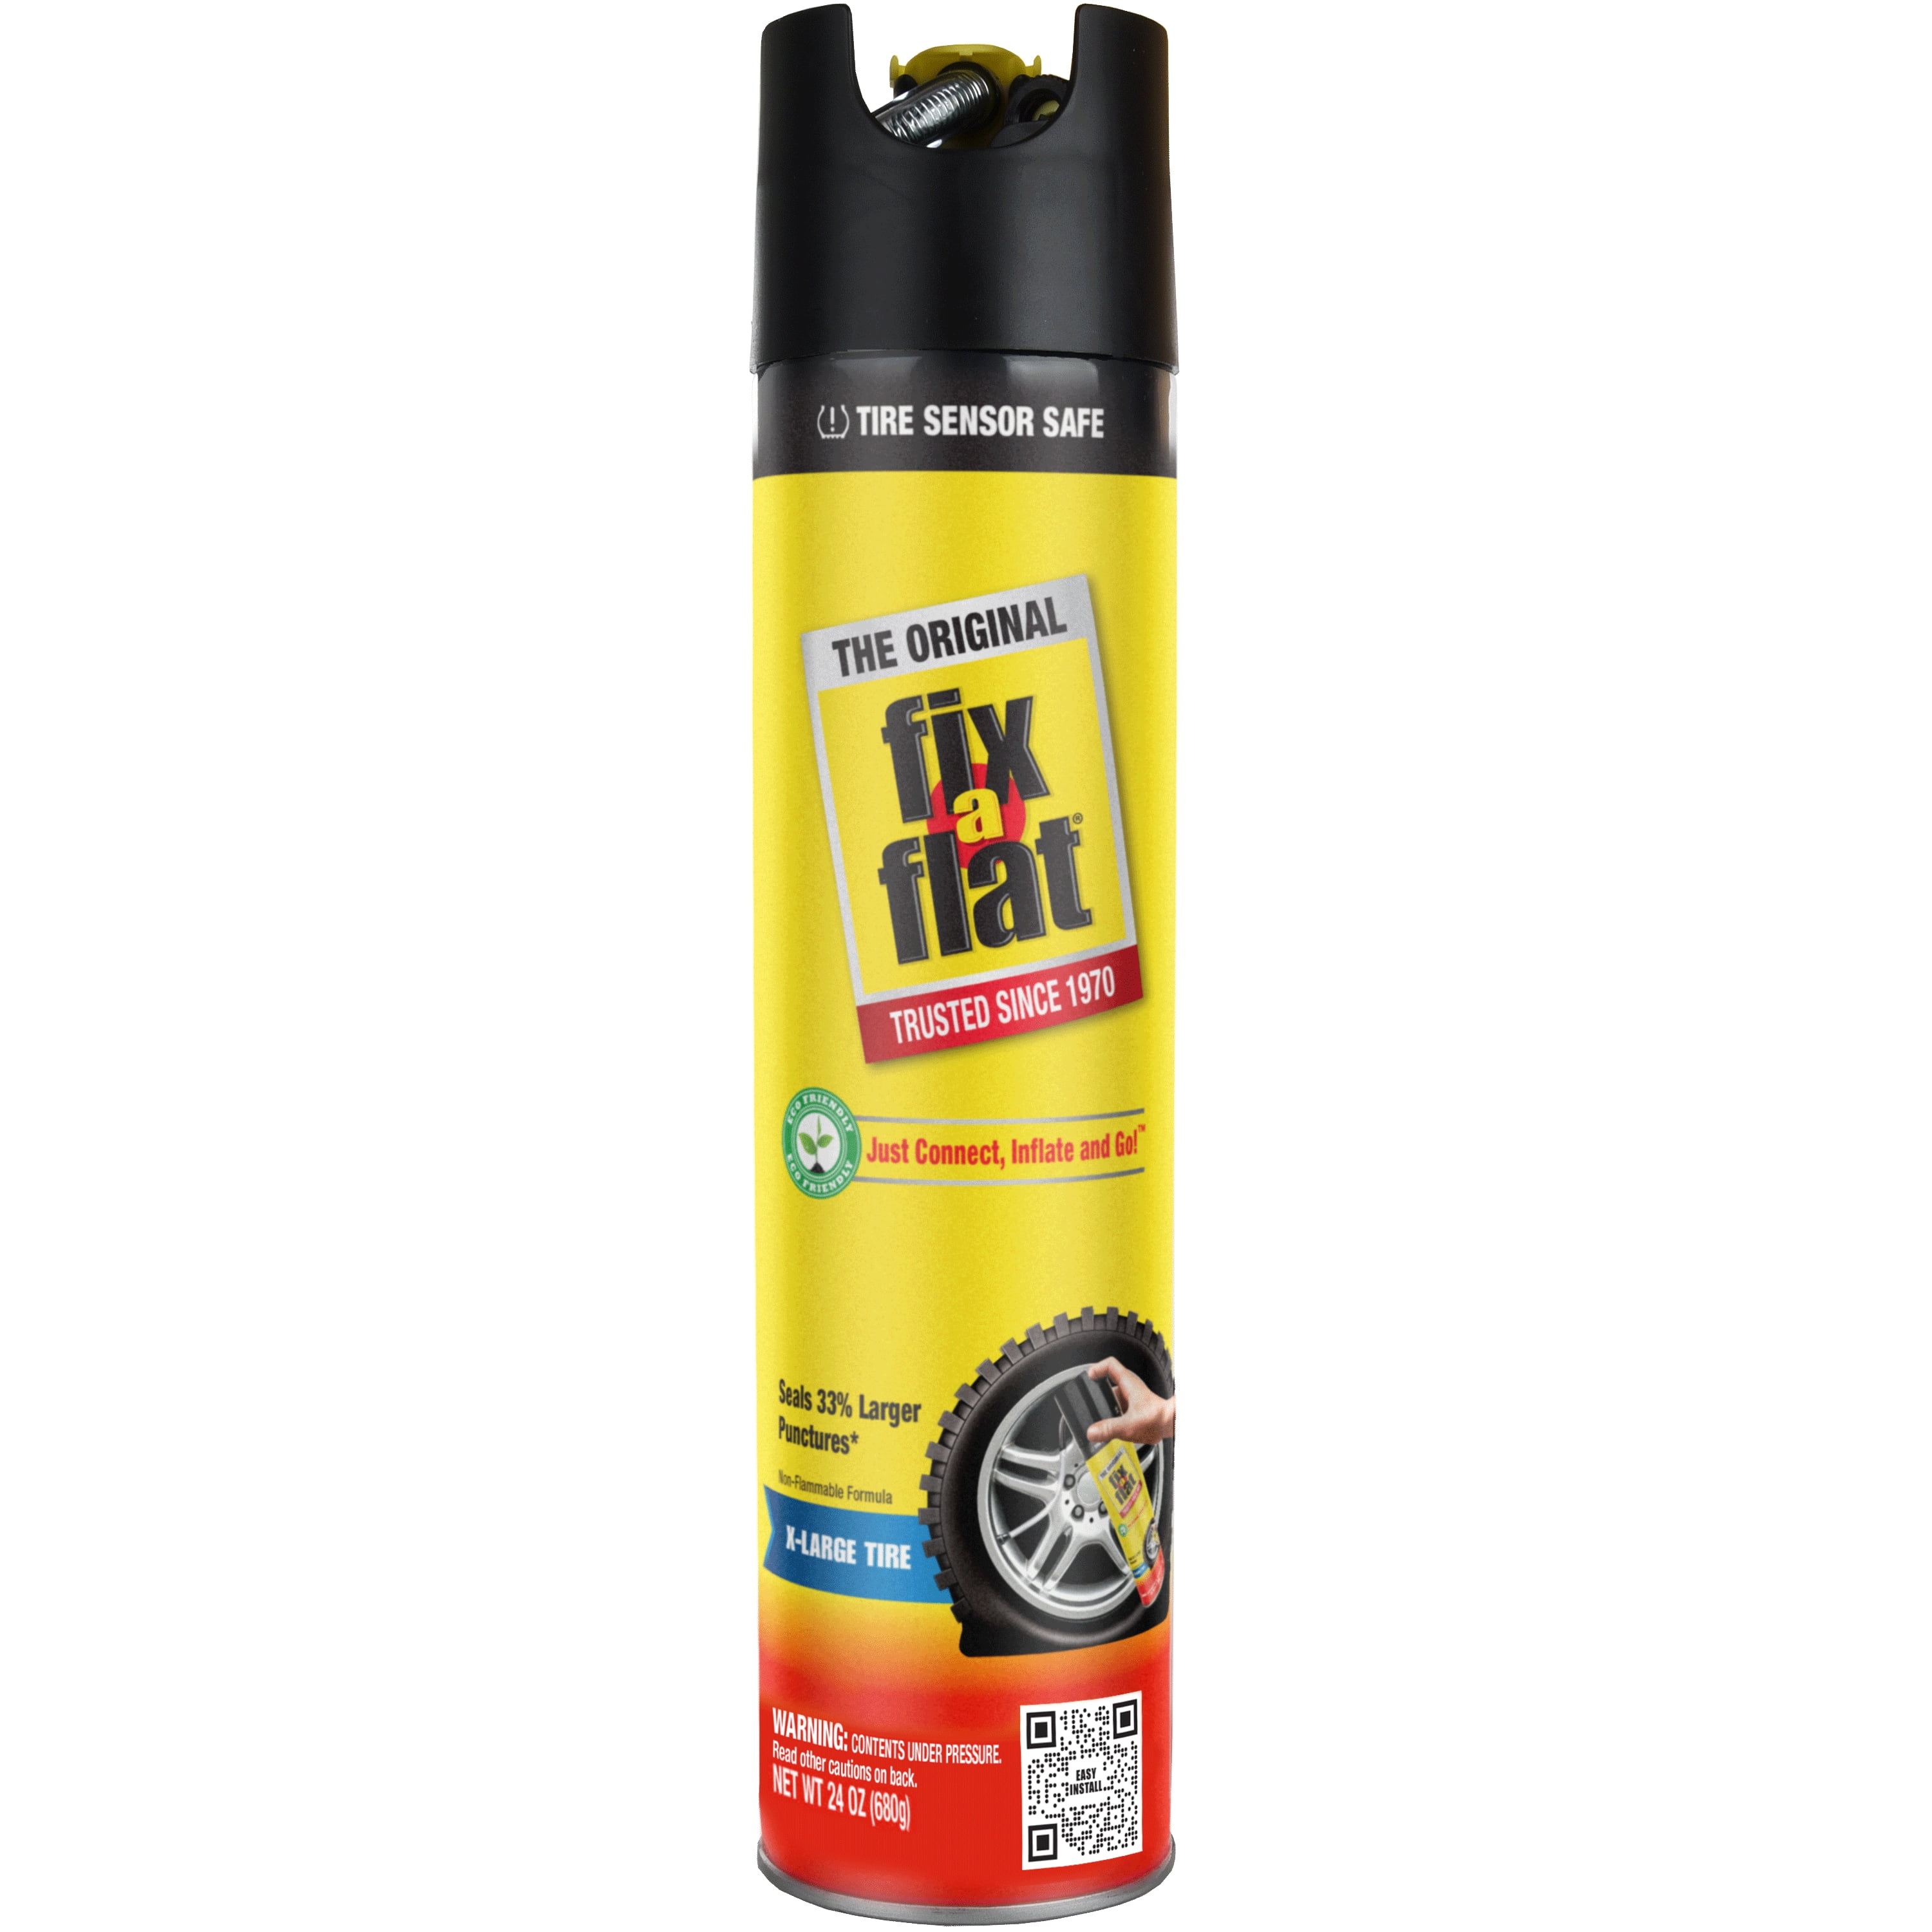 Seals And Inflates Flat Tyres Tire inflator HI GEAR EMERGENCY TYRE INFLATOR 